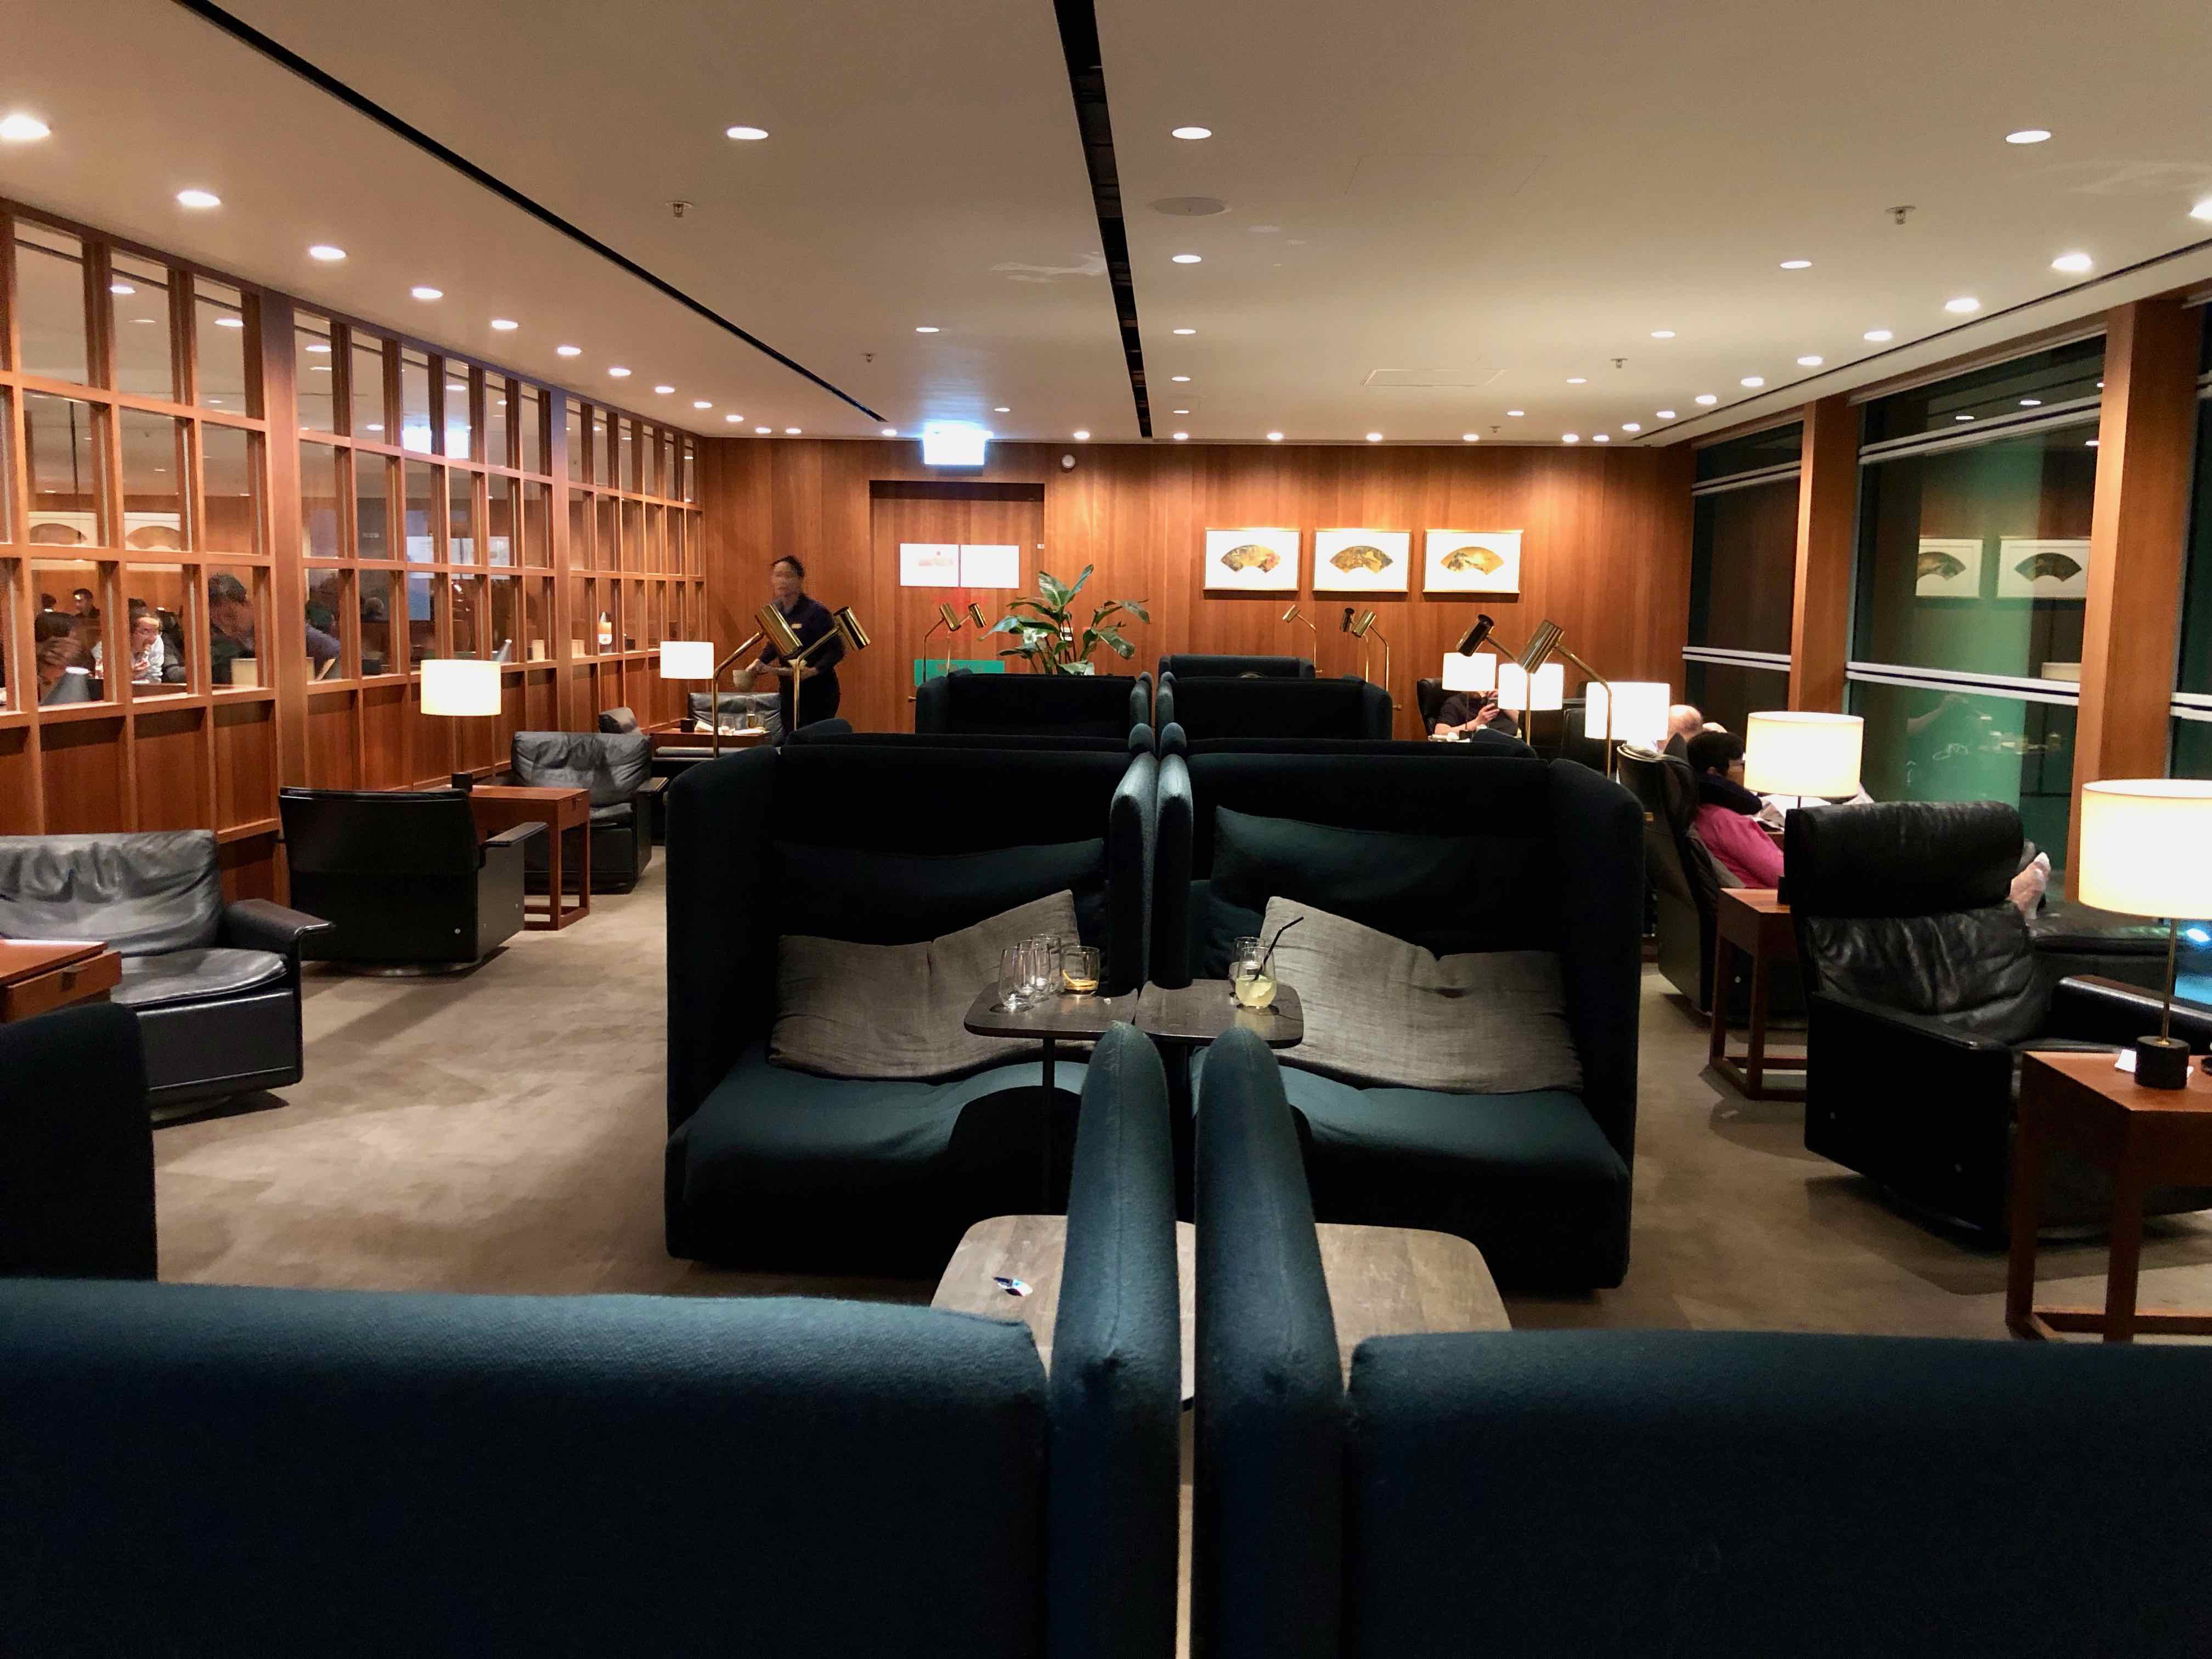 Cathay Pacific The Pier Business Class Lounge Hong Kong seating option by the window